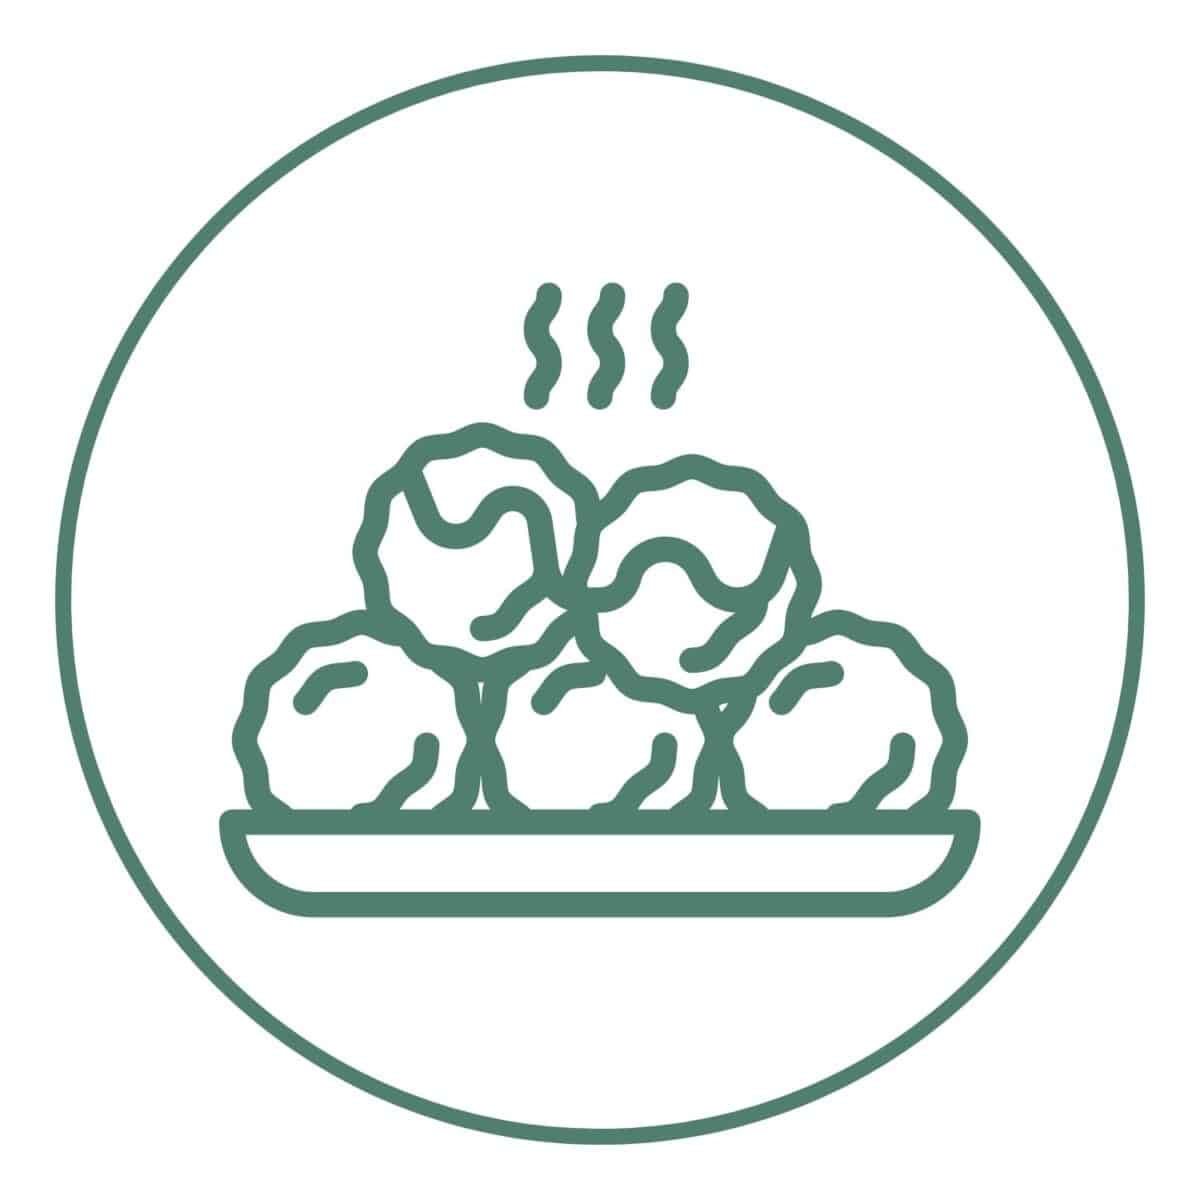 Green icon with meatballs.